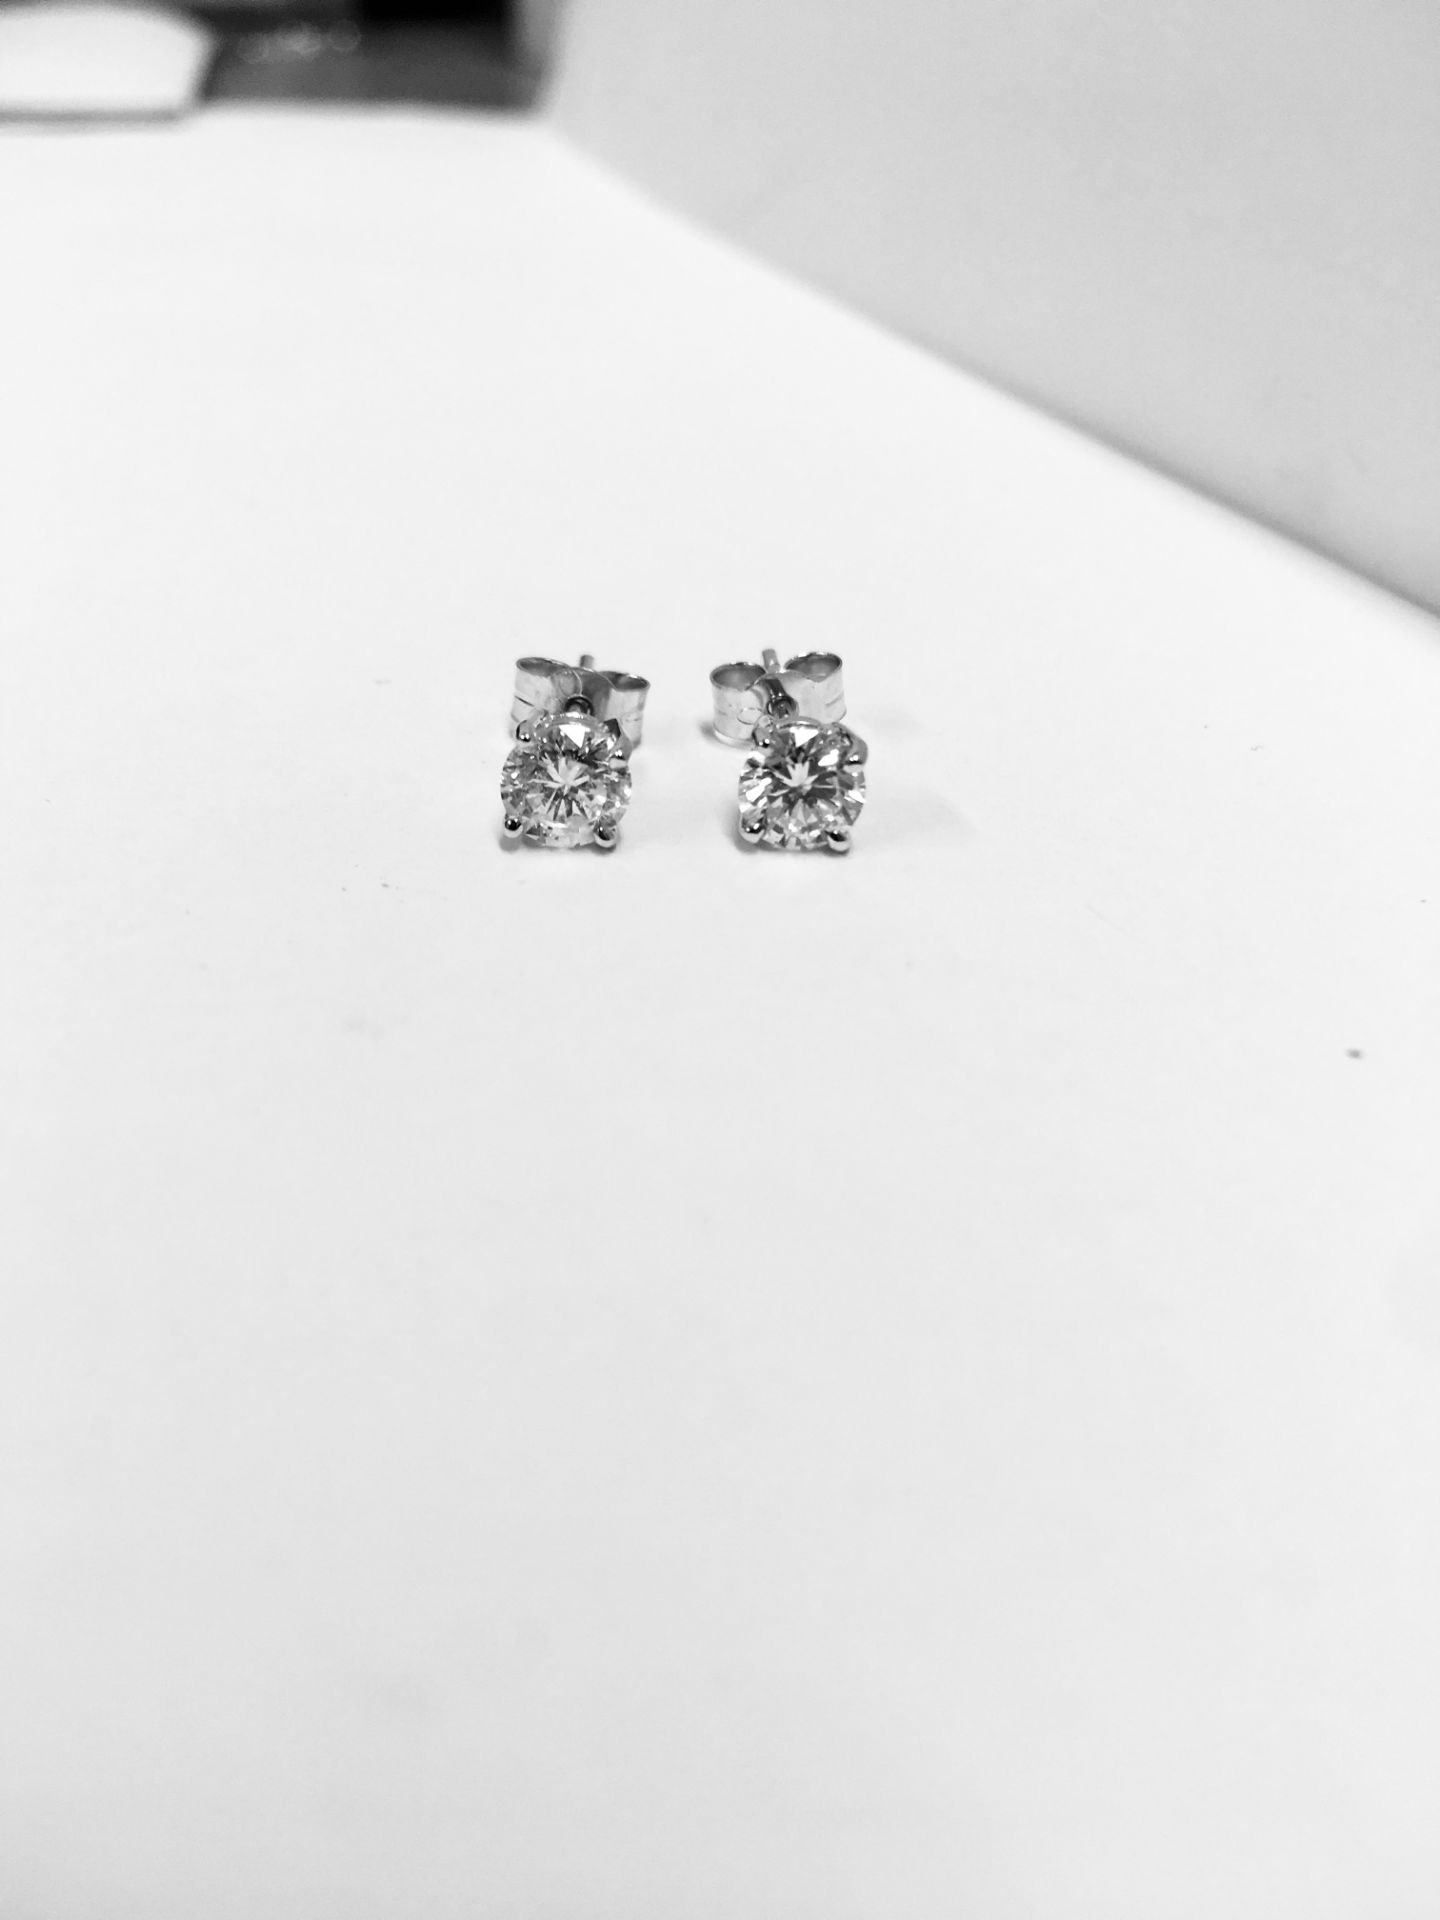 1.00ct diamond solitaire earrings set in 18ct white gold. 2 x brilliant cut diamonds, 0.50ct ( - Image 5 of 5